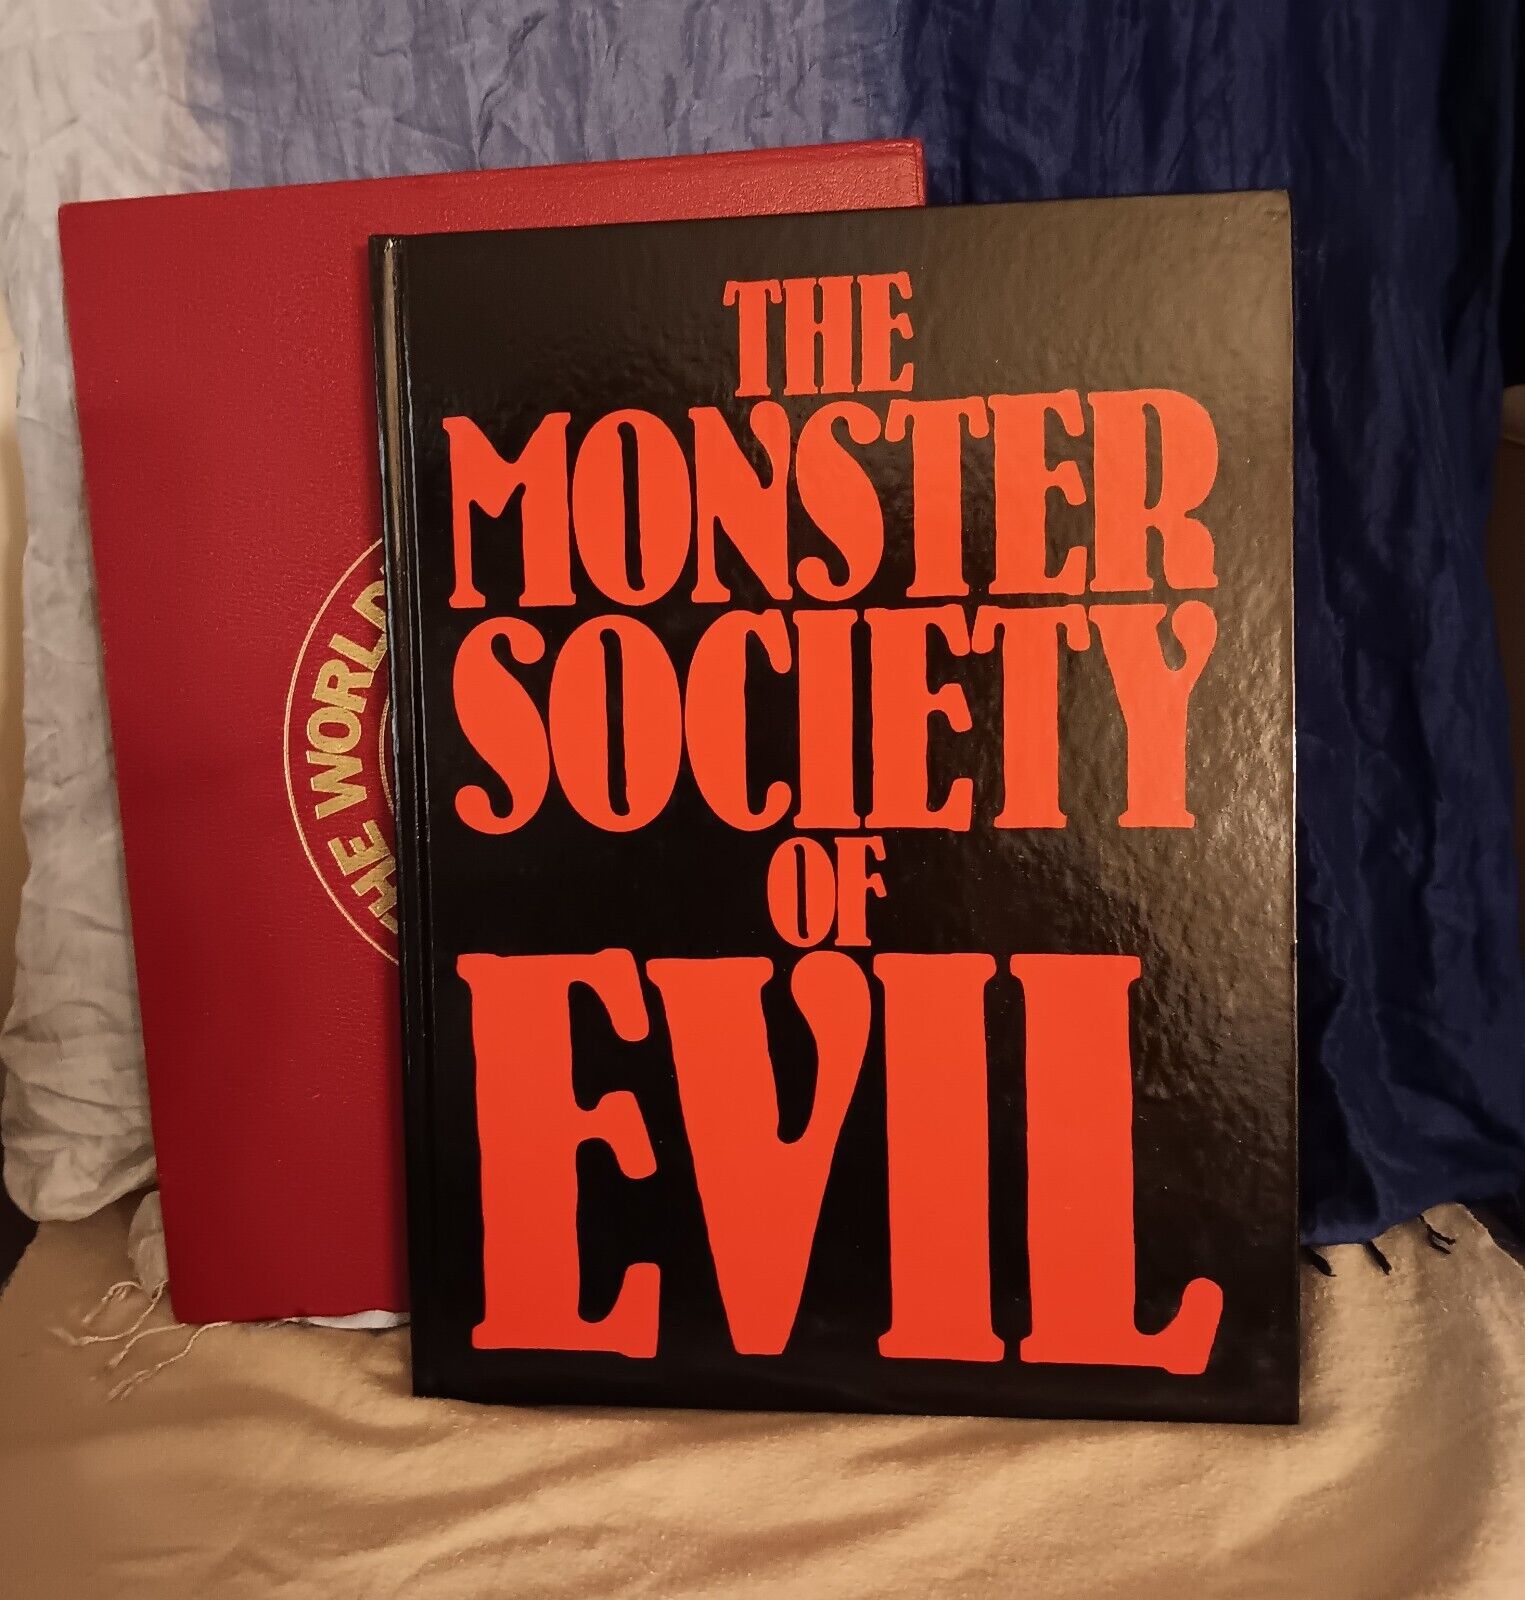 Shazam The Monster Society of Evil, Deluxe Limited Collector's Edition 875/3000